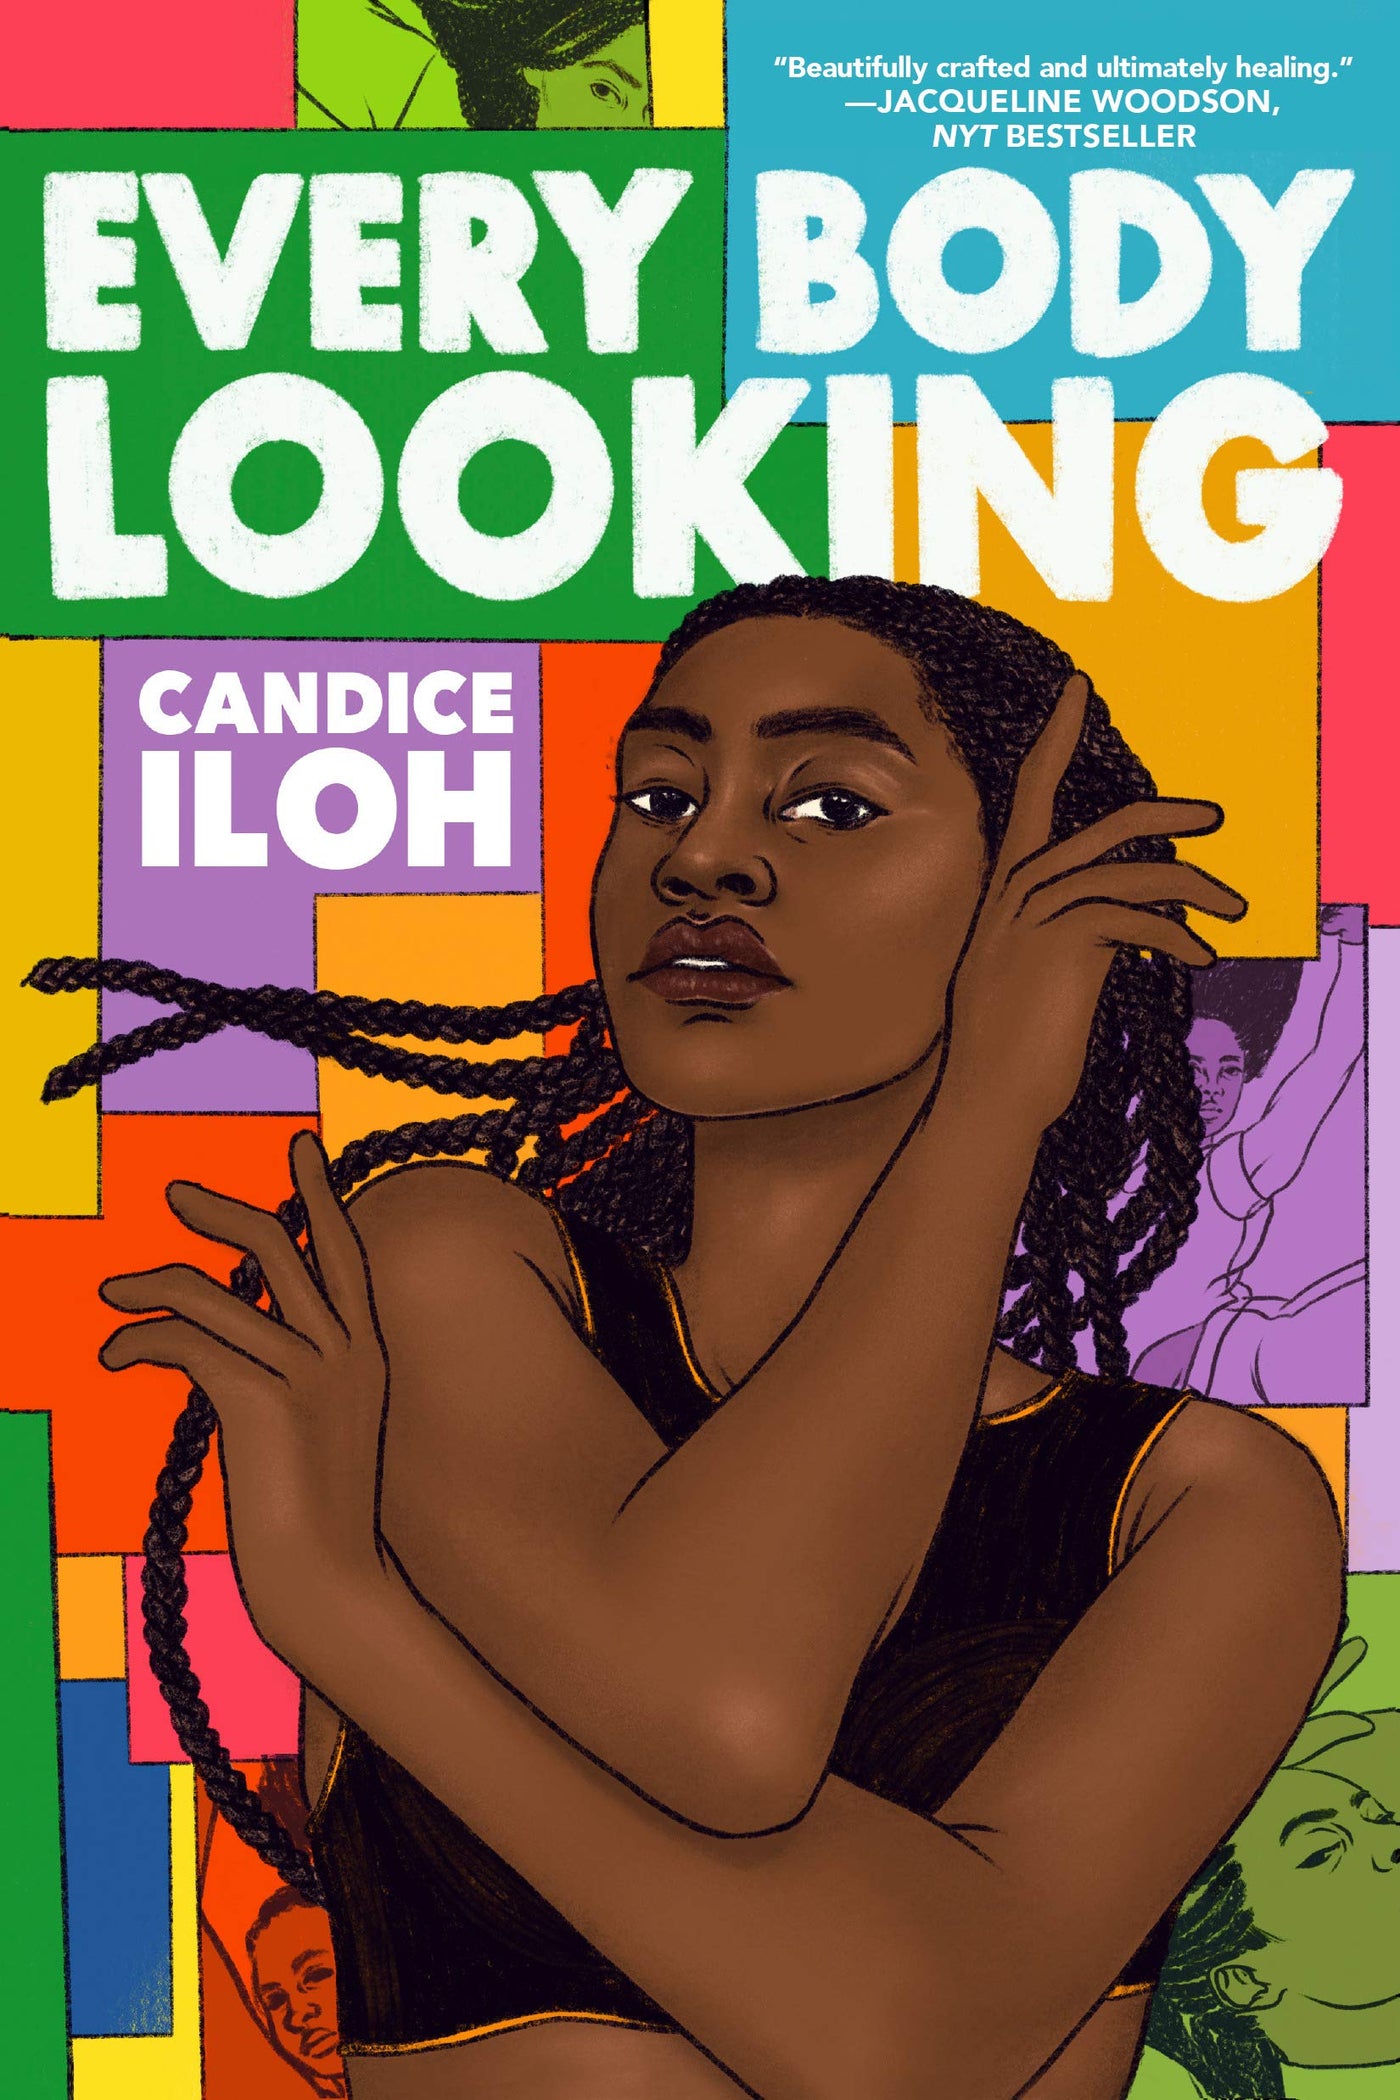 Every Body Looking: Candice Iloh